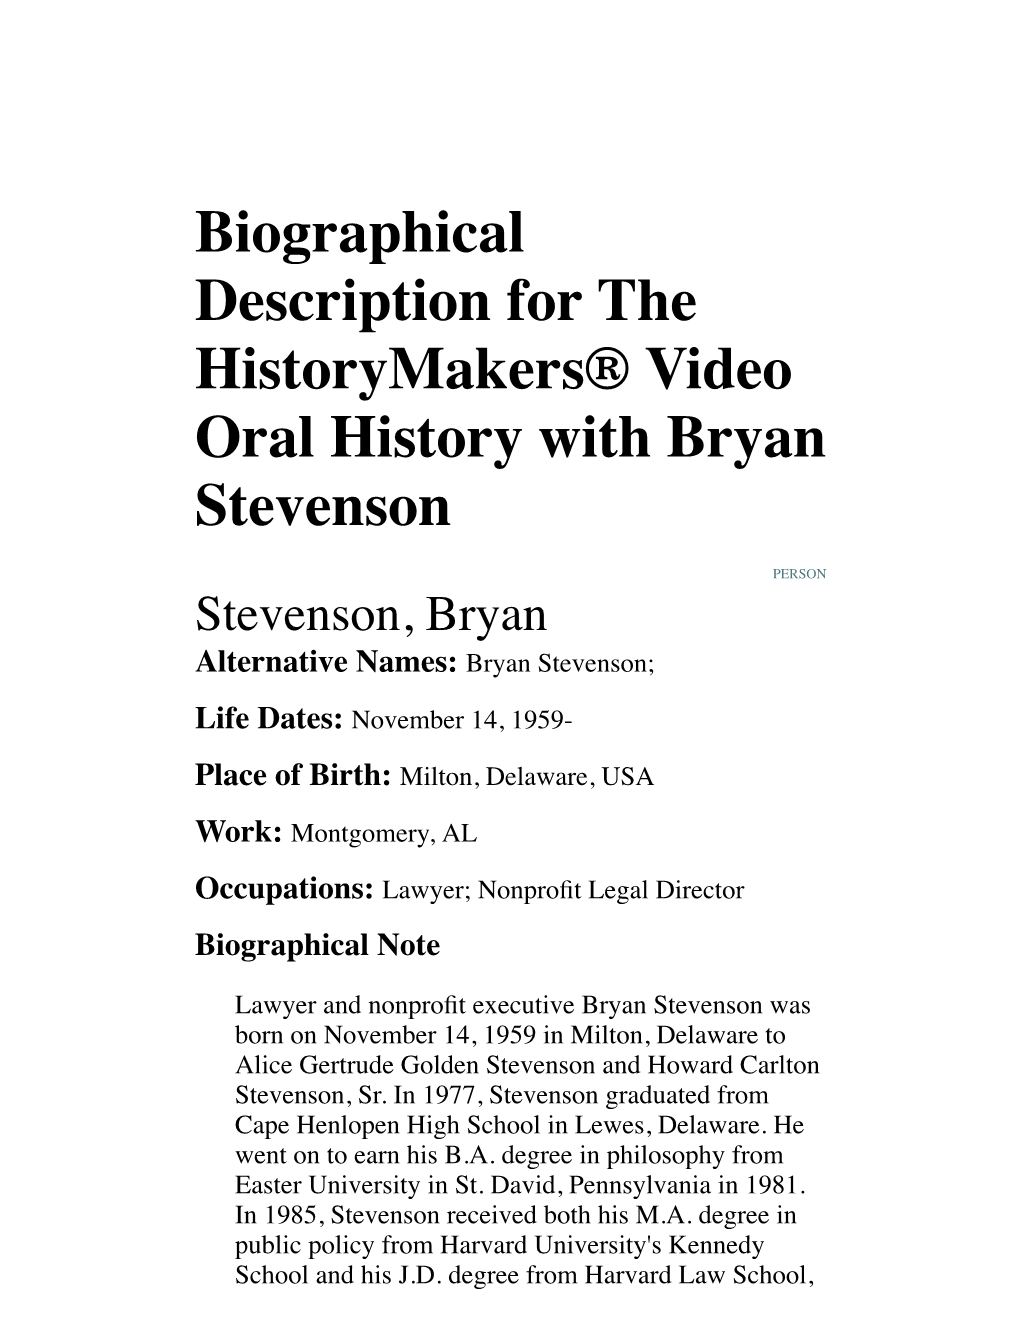 Biographical Description for the Historymakers® Video Oral History with Bryan Stevenson